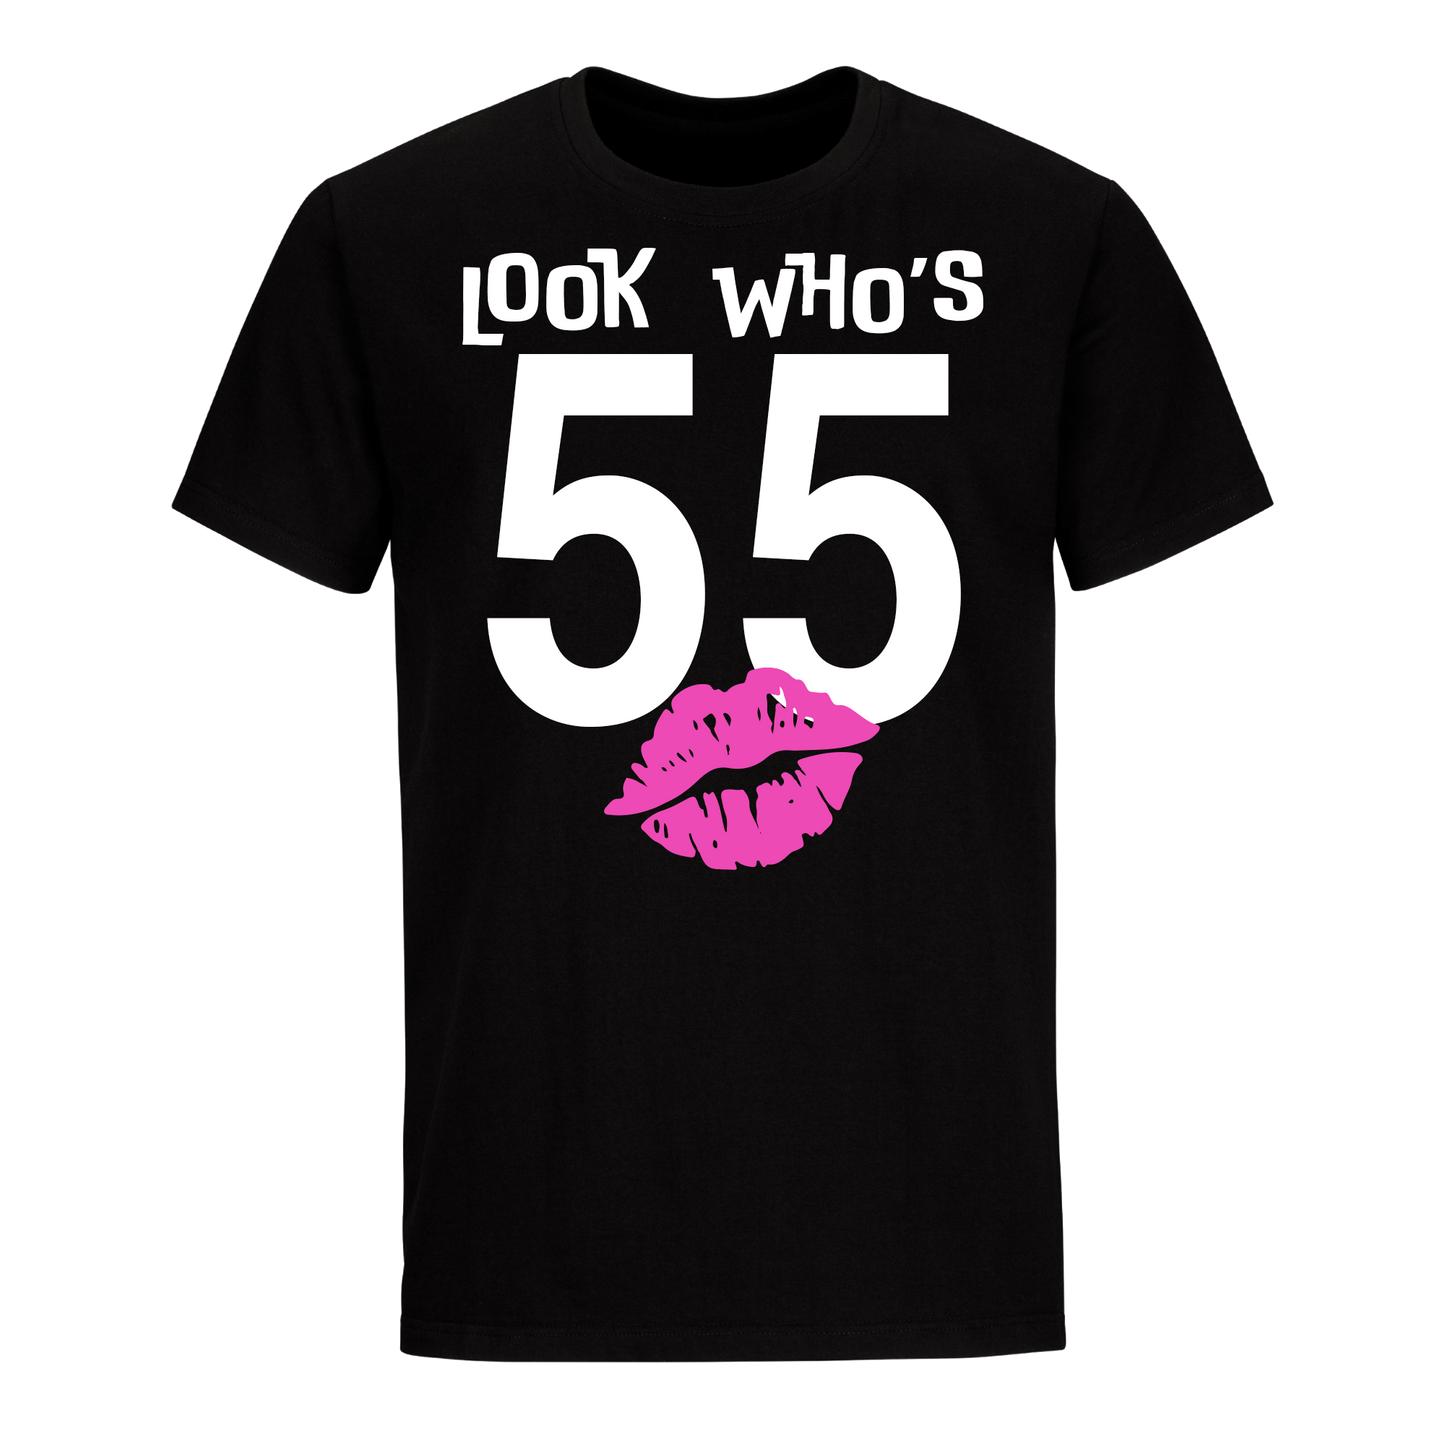 LOOK WHO'S 55 UNISEX SHIRT